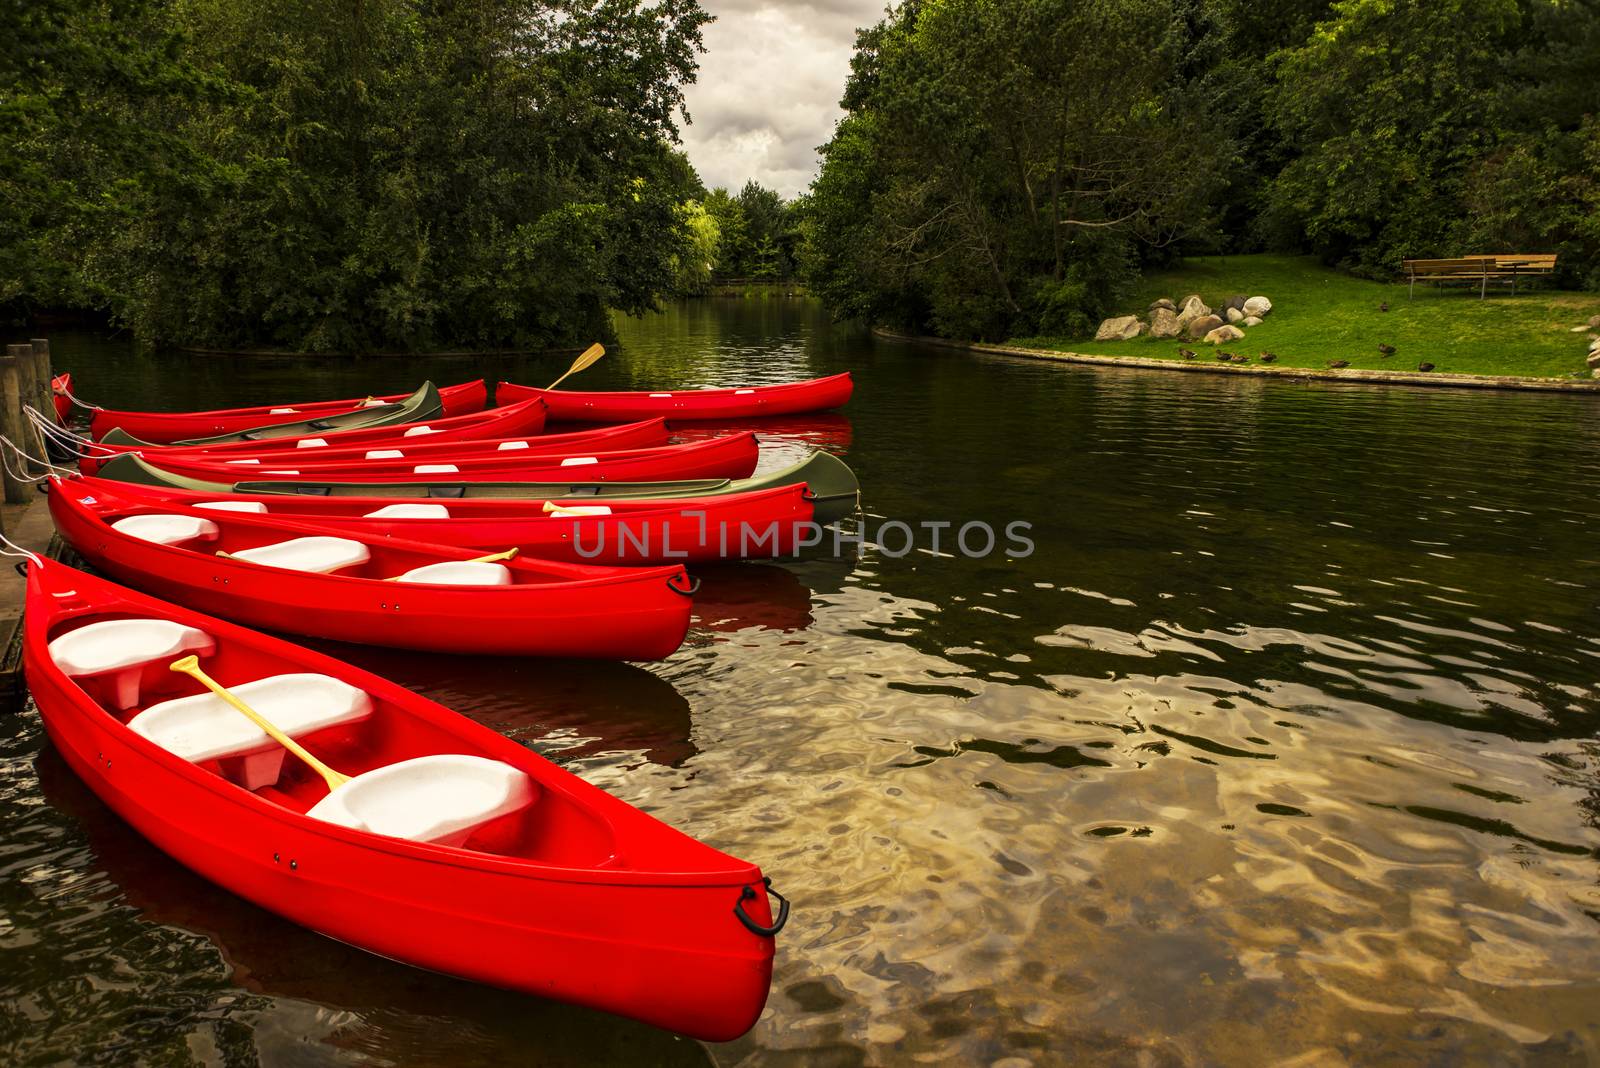 Red rental canoes on a lake.  The canoes are moored and ready for a trip.